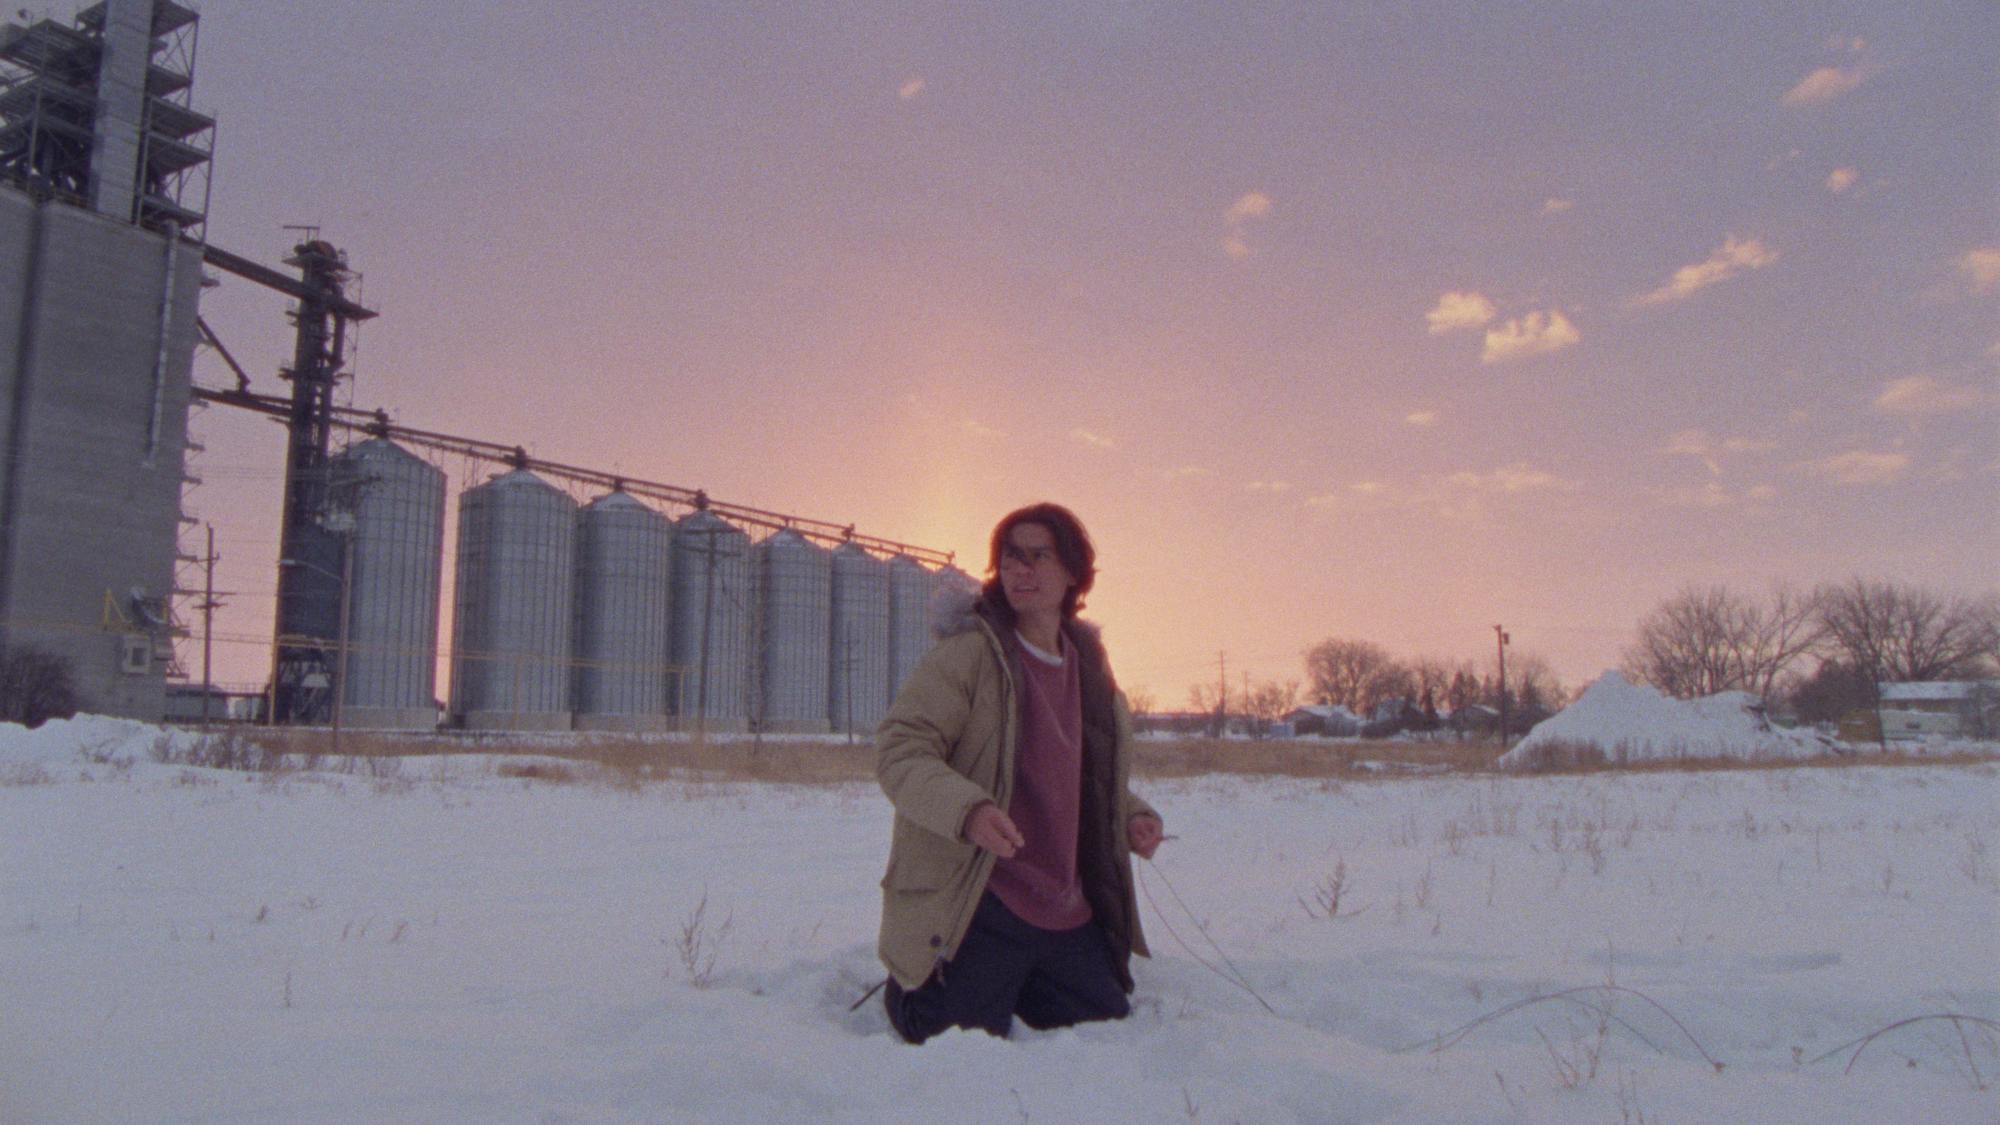 'How to Blow Up a Pipeline' Forrest Goodluck as Michael standing in the snow in front of an oil factory.